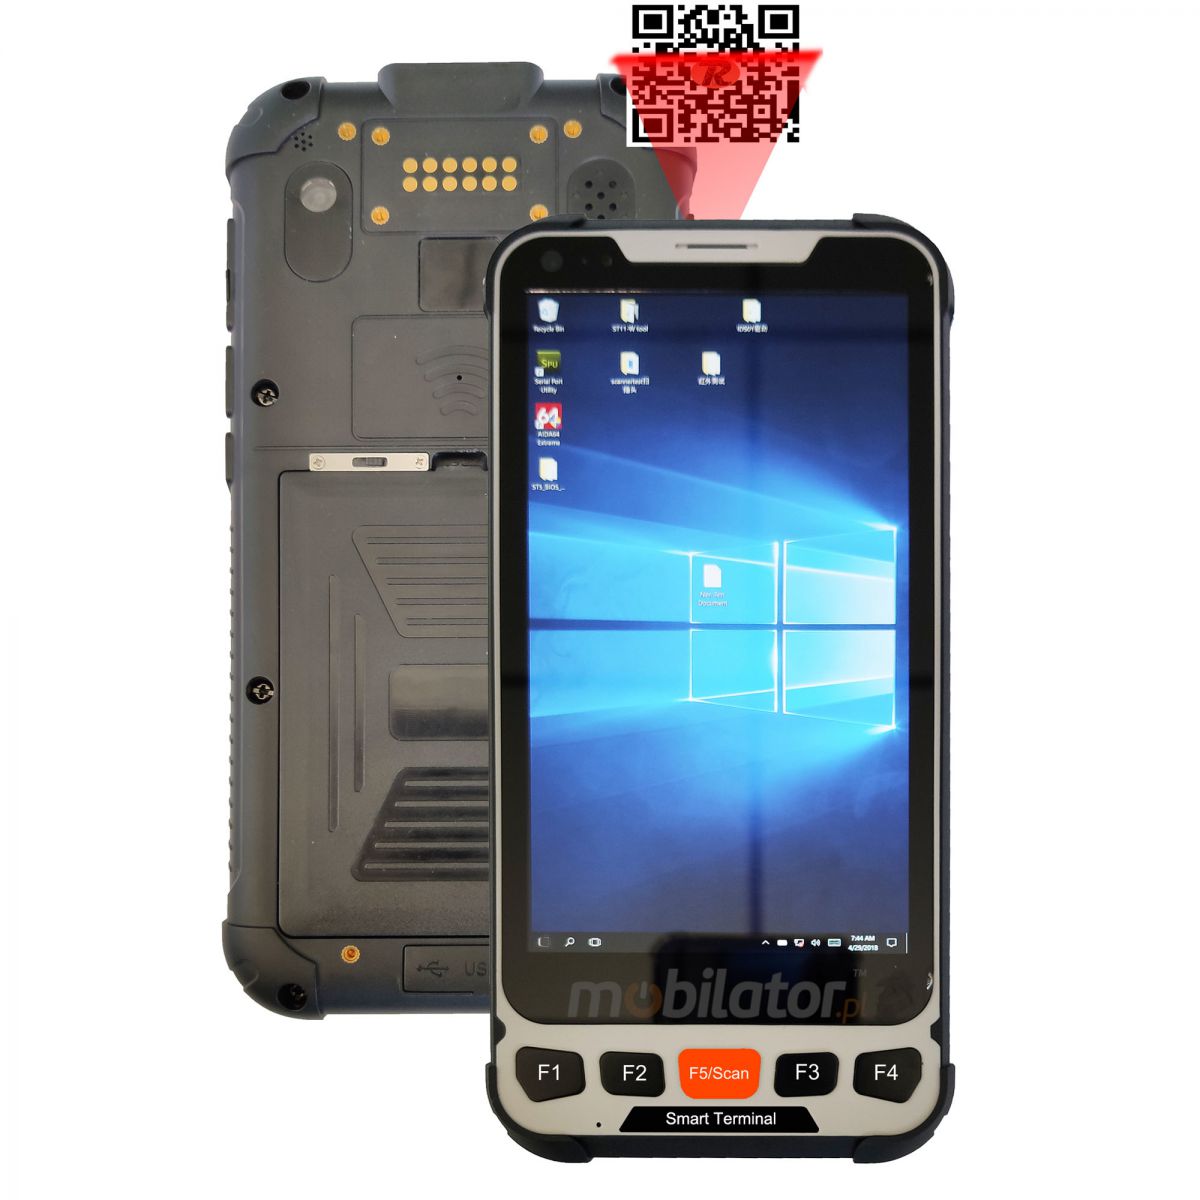 Mobipad SH5 v.3 - Industrial data terminal with UHF RFID, NFC, 4G and BT 4.0, 4GB RAM and 64GB disk 